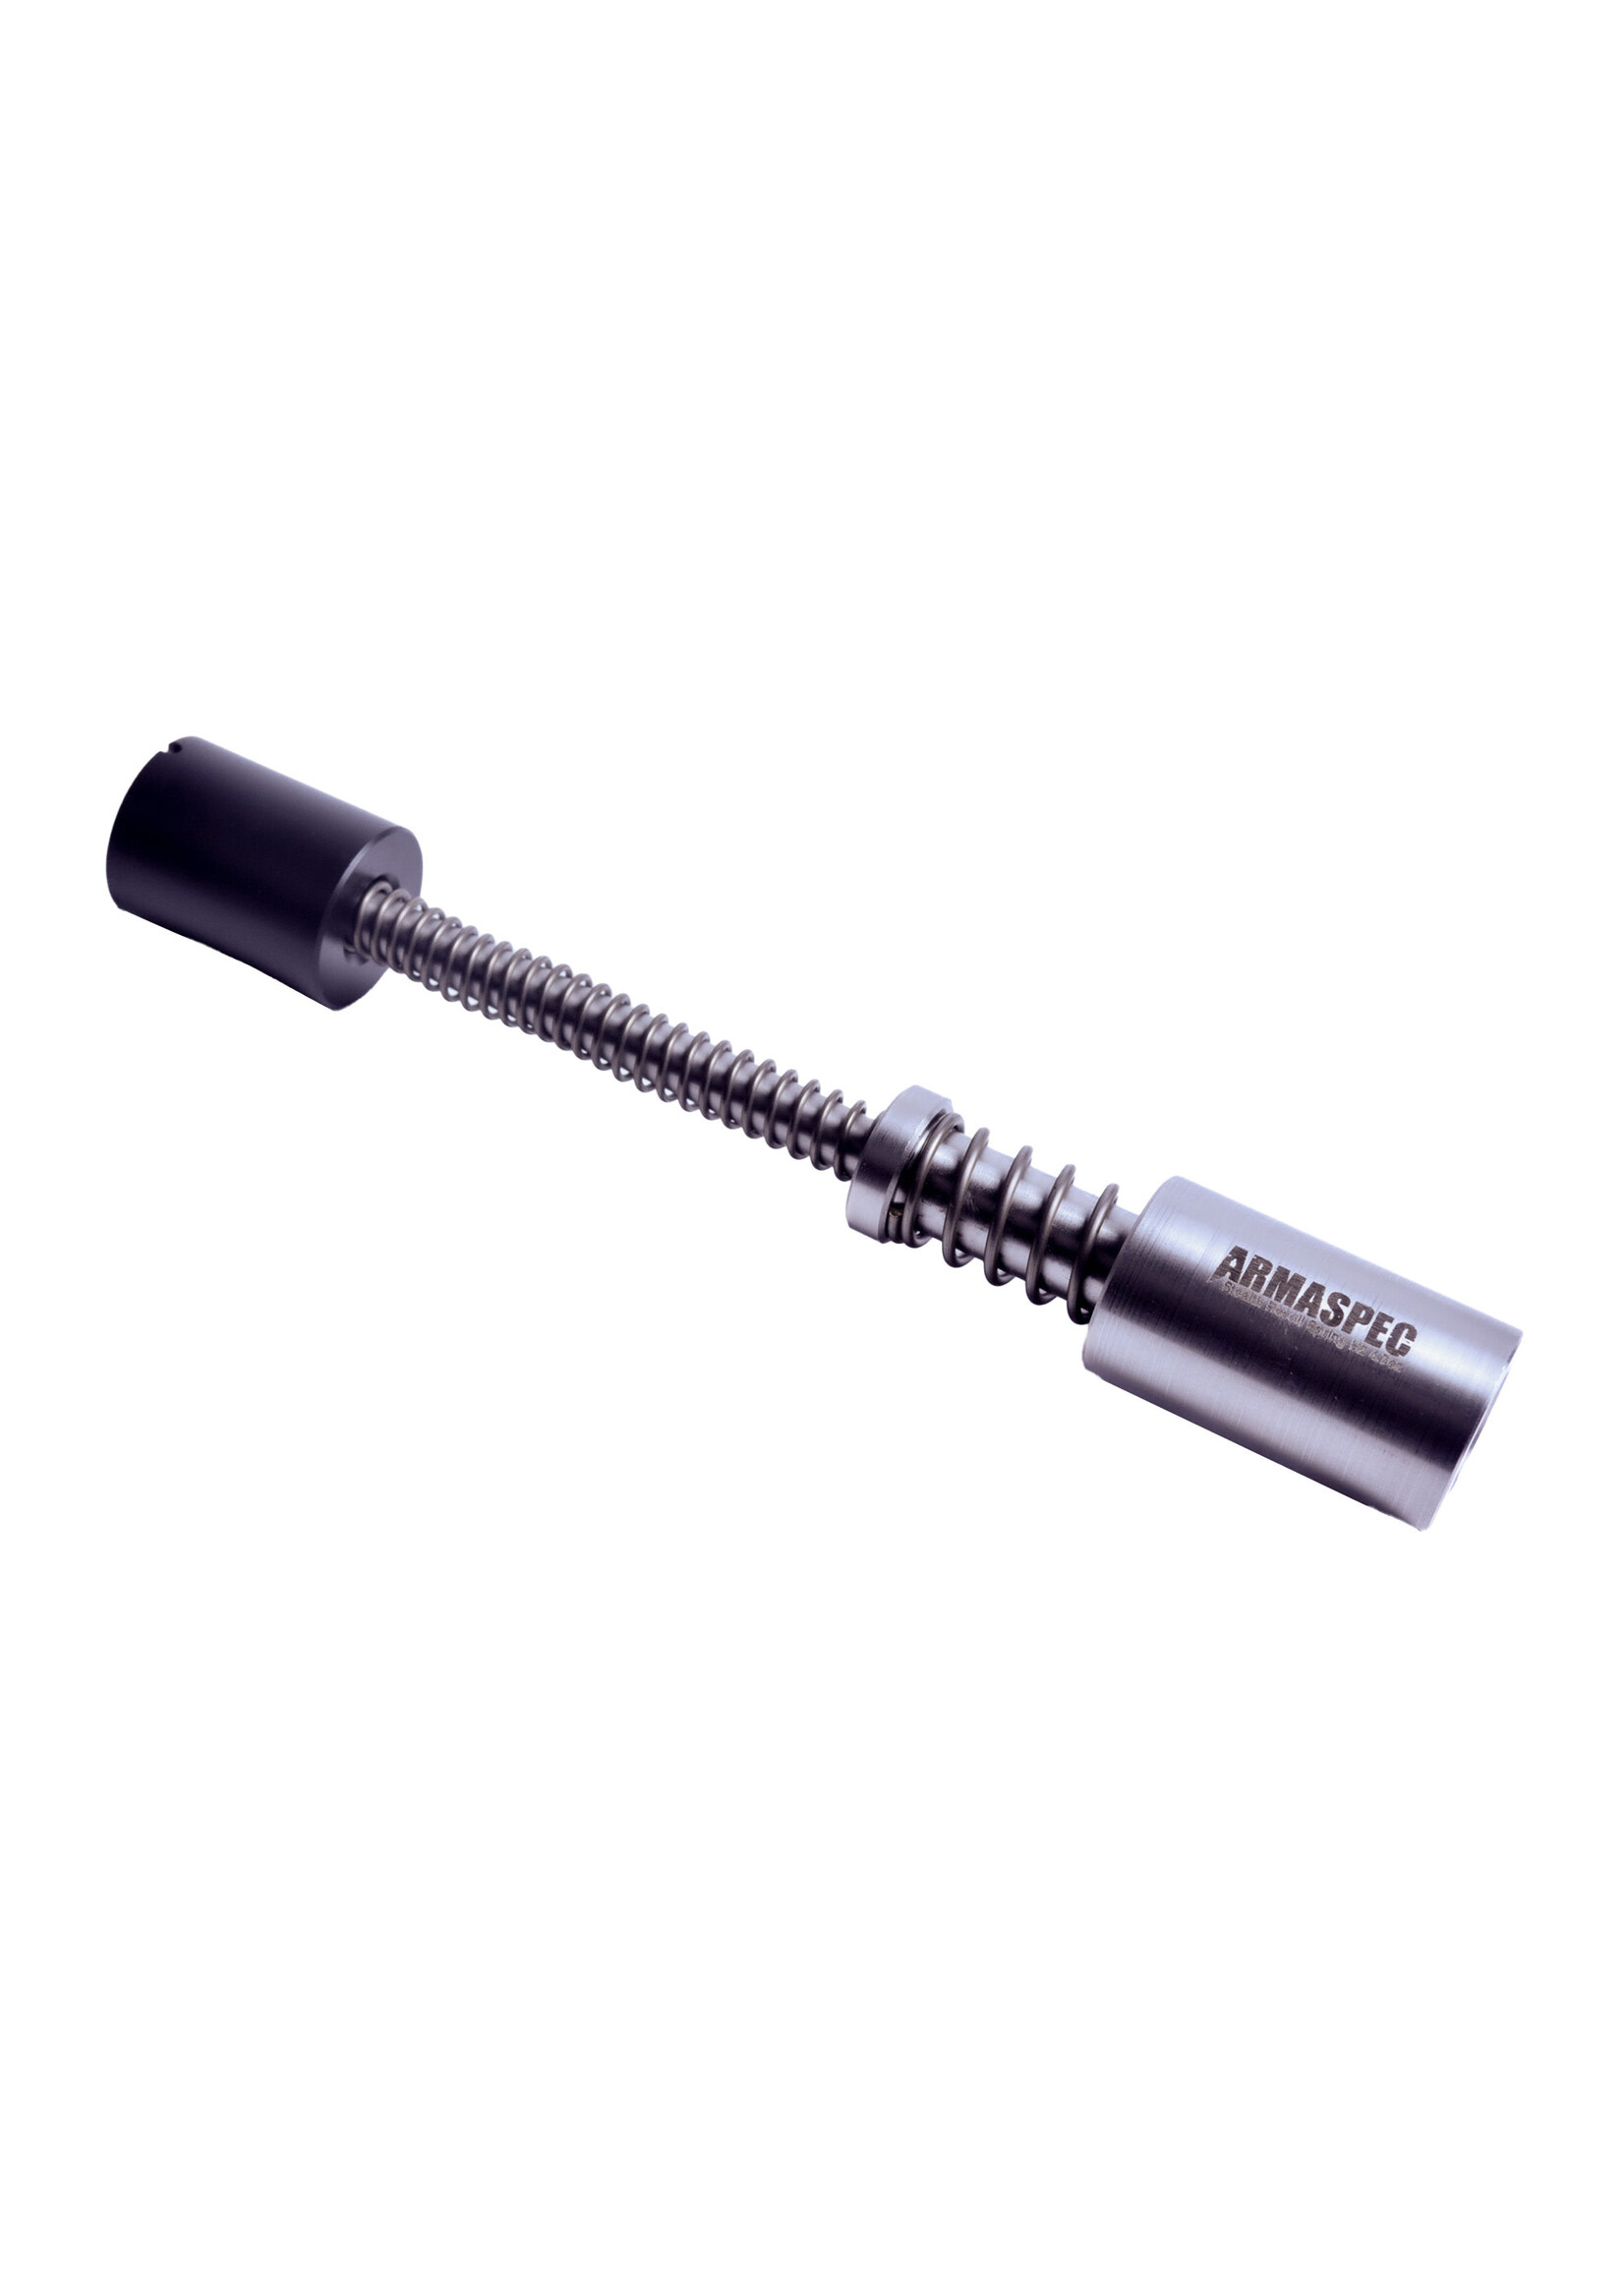 Armaspec Armaspec Stealth Recoil Spring, SRS-H2, AR15 Gen 4, 4.7oz, Black, Replacement For Standard Buffer and Spring